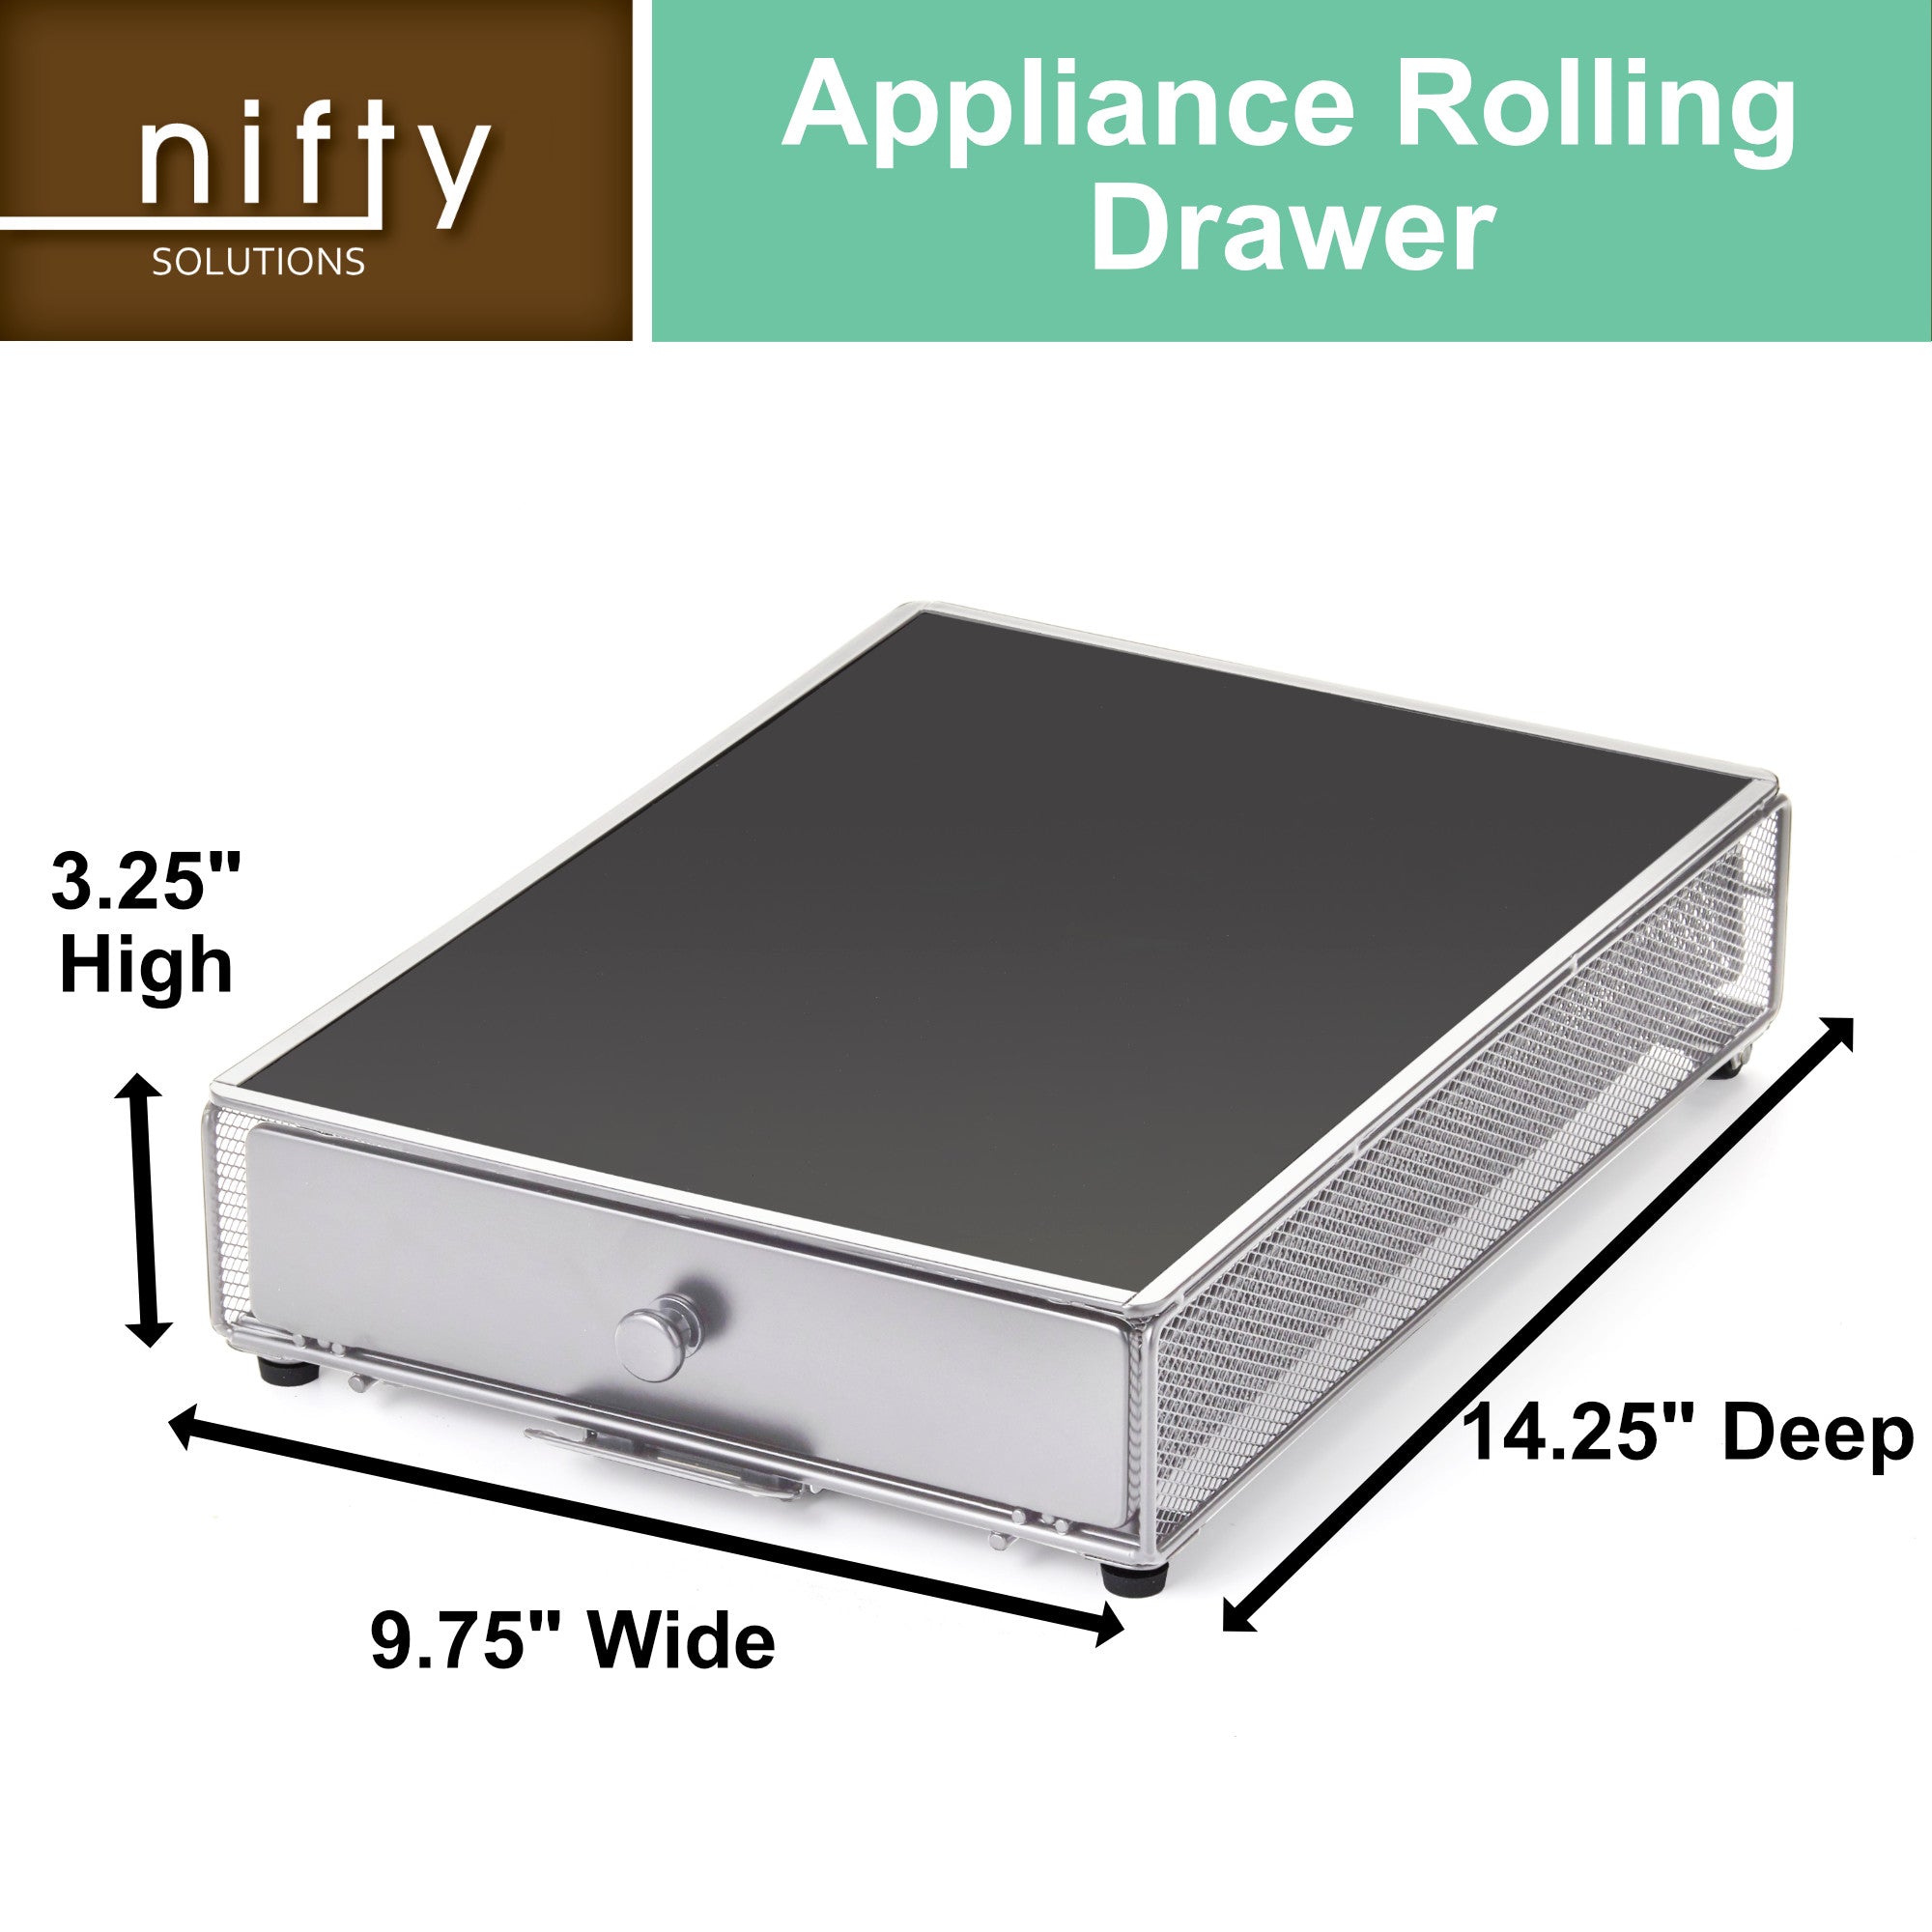 Rolling Appliance Drawer – Nifty Home Products